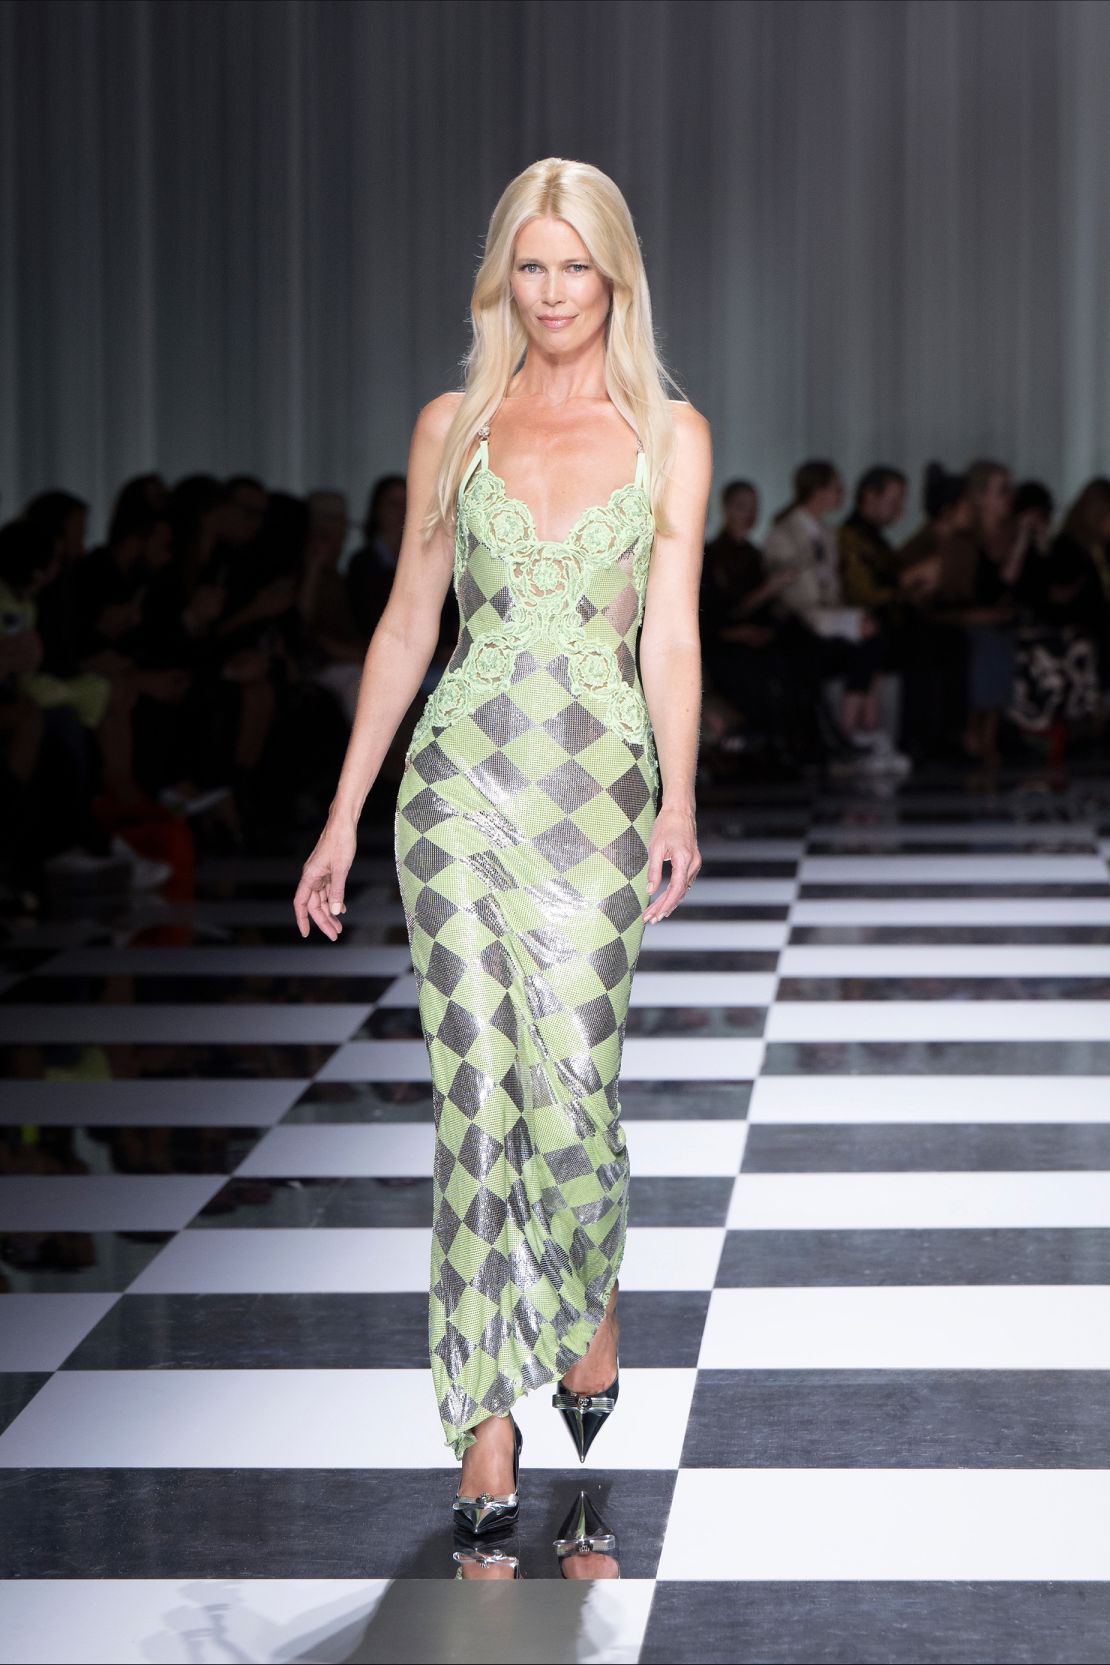 Supermodel of the 1990s, Claudia Schiffer, returned to the runway for a nostalgic moment during the Versace show.